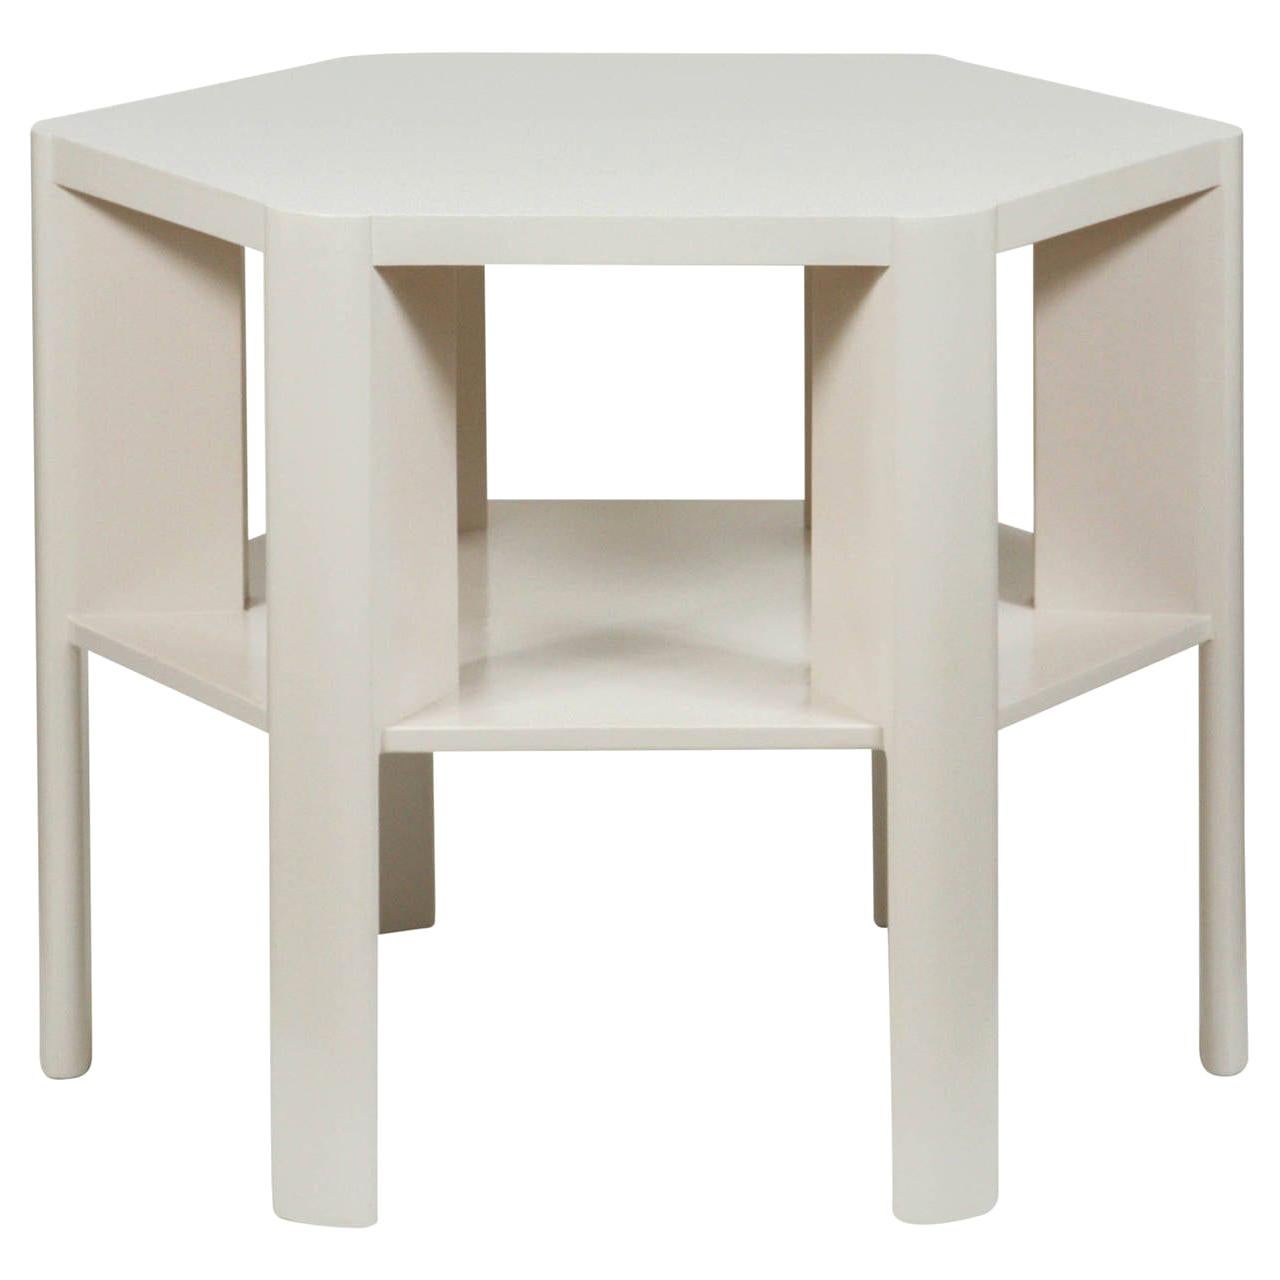 Minimalist Modern Lacquered Library Table by Martin and Brockett, Shown in White